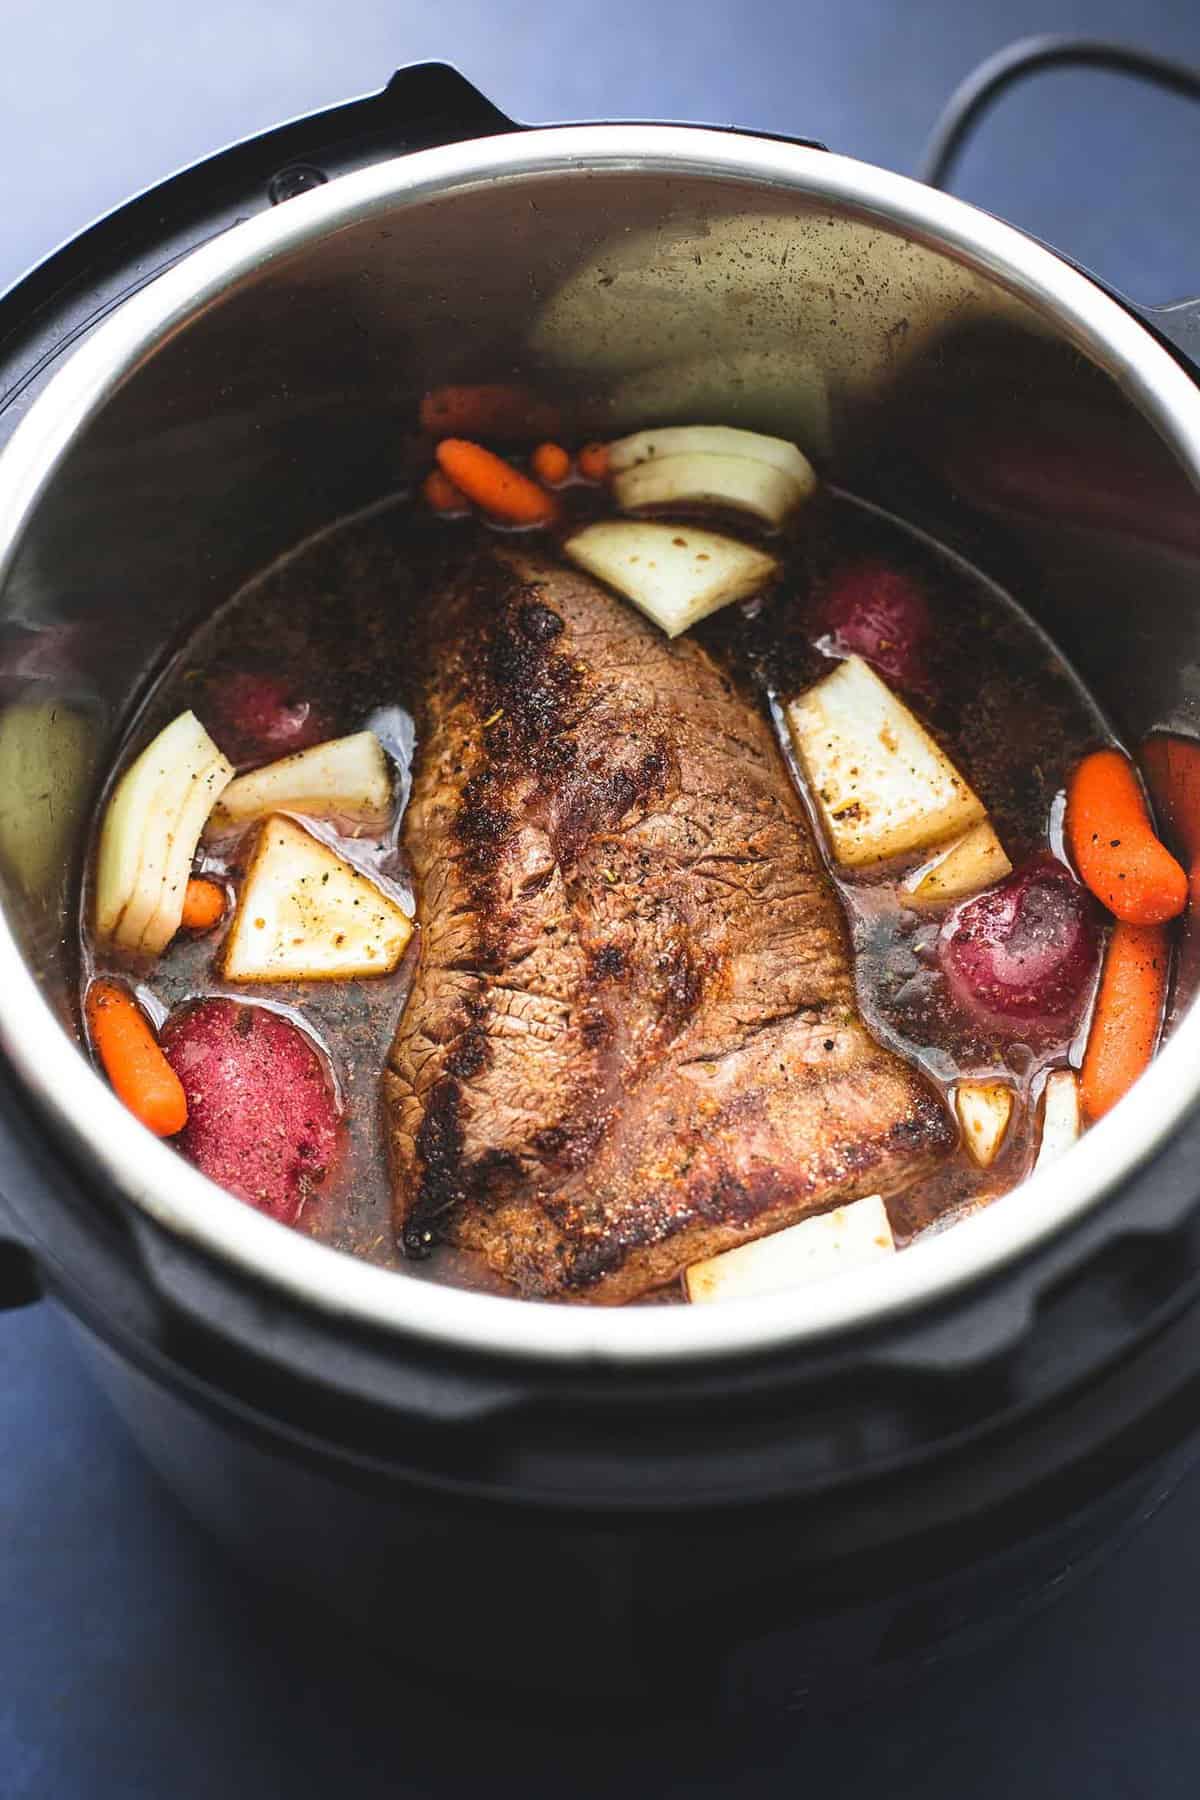 How to Use an Instant Pot! Time to Pull It Out! Instant Pot 101 